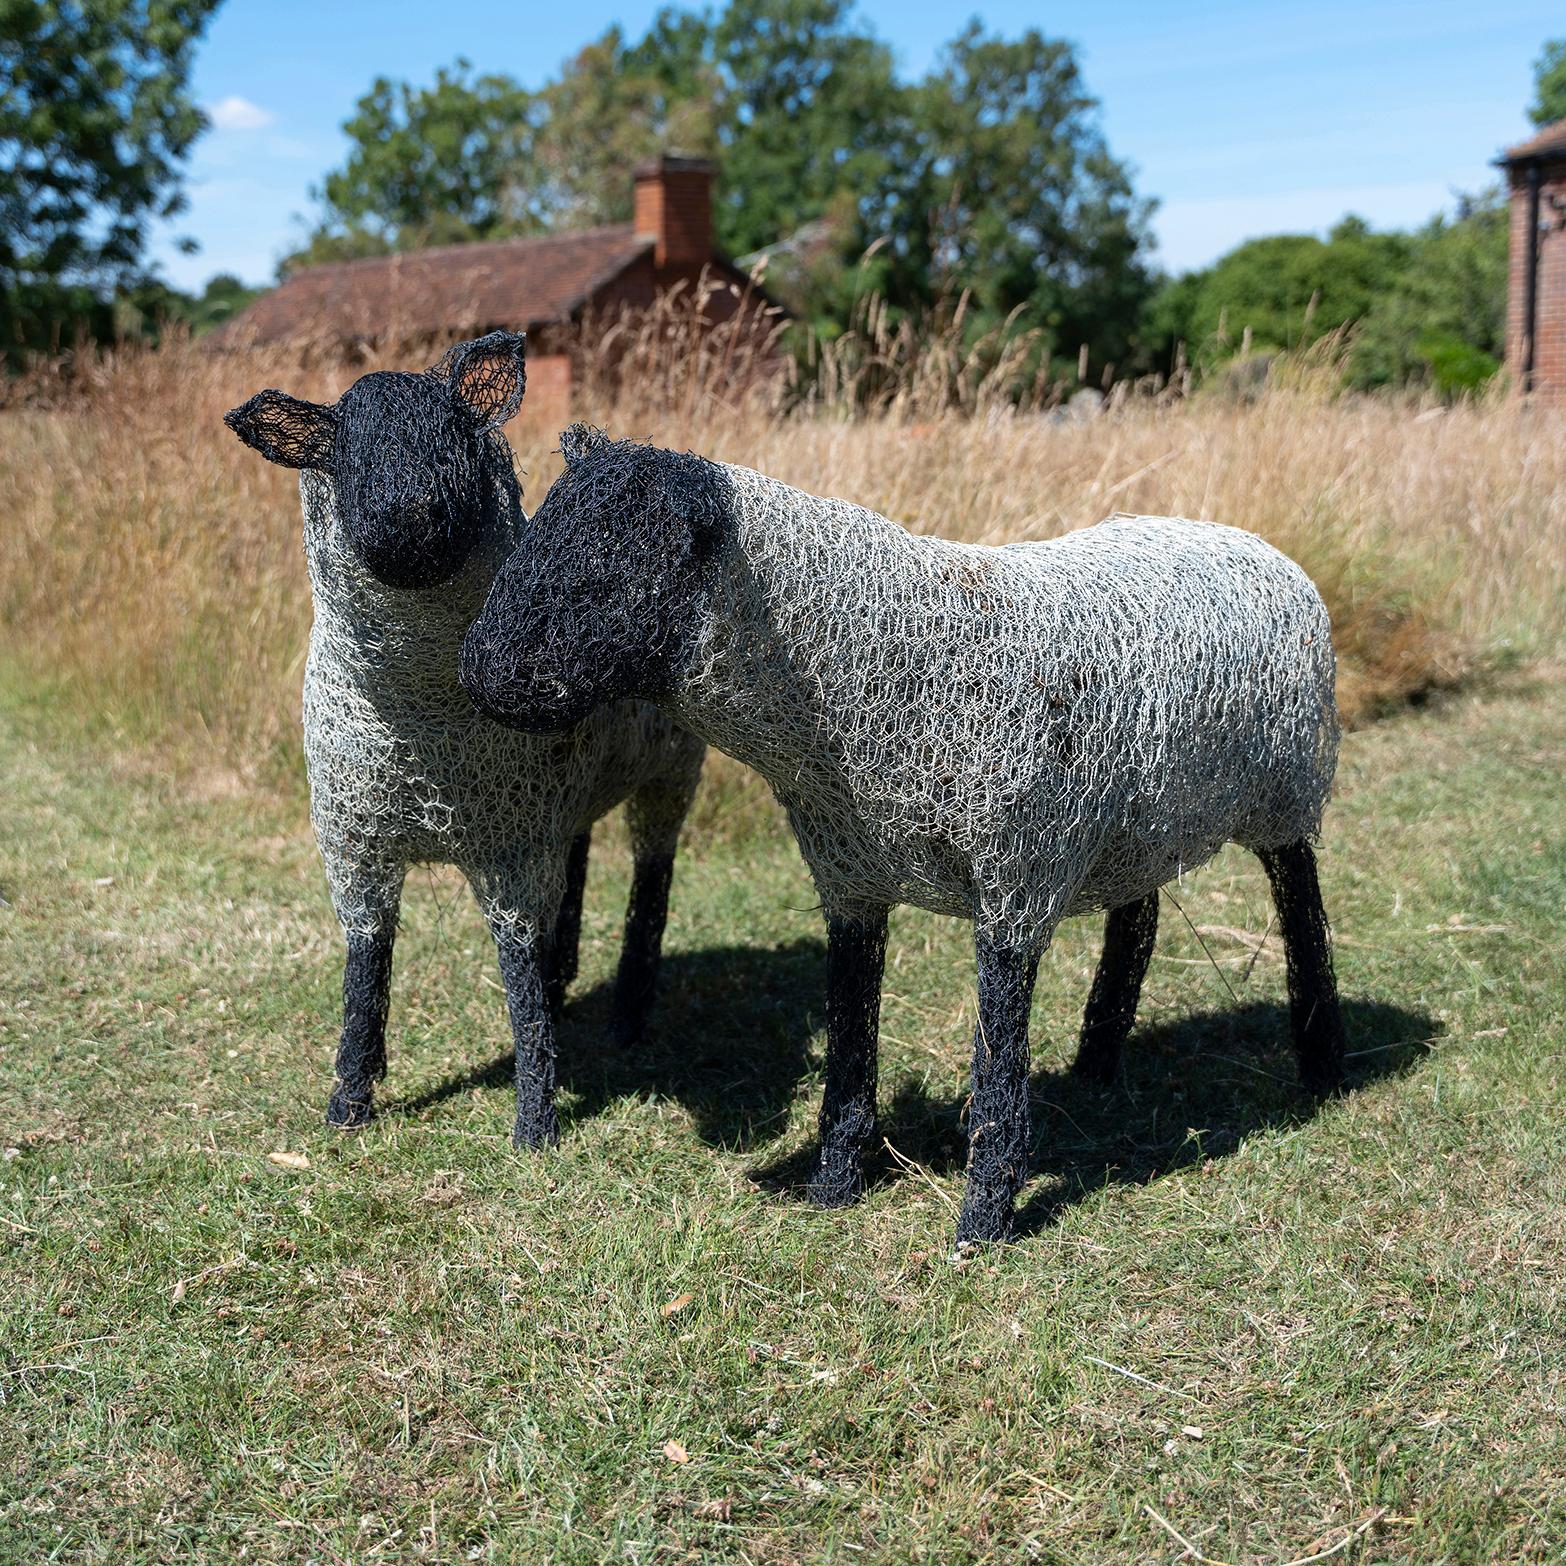 A Pair of Contemporary, Folk Art, Life-Size, Sheep, Wirework, Garden Sculptures

Hand-sculpted using multiple layers of painted galvanized wire in white and black.  Each sculpture is unique.  These sheep are very realistic and often mistaken for the